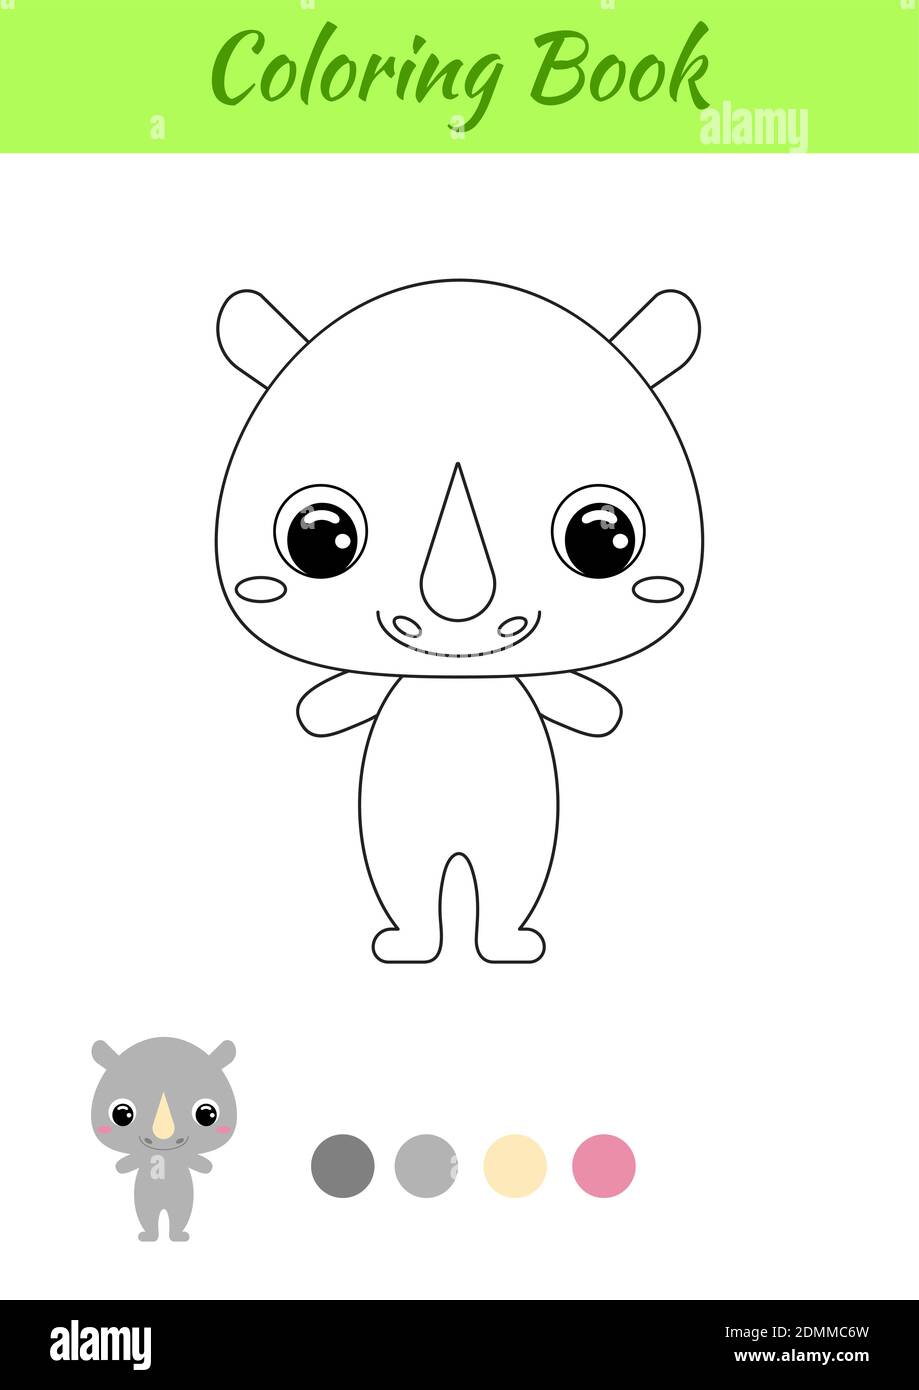 Coloring book little baby rhino. Coloring page for kids. Educational activity for preschool years kids and toddlers with cute animal. Stock Vector